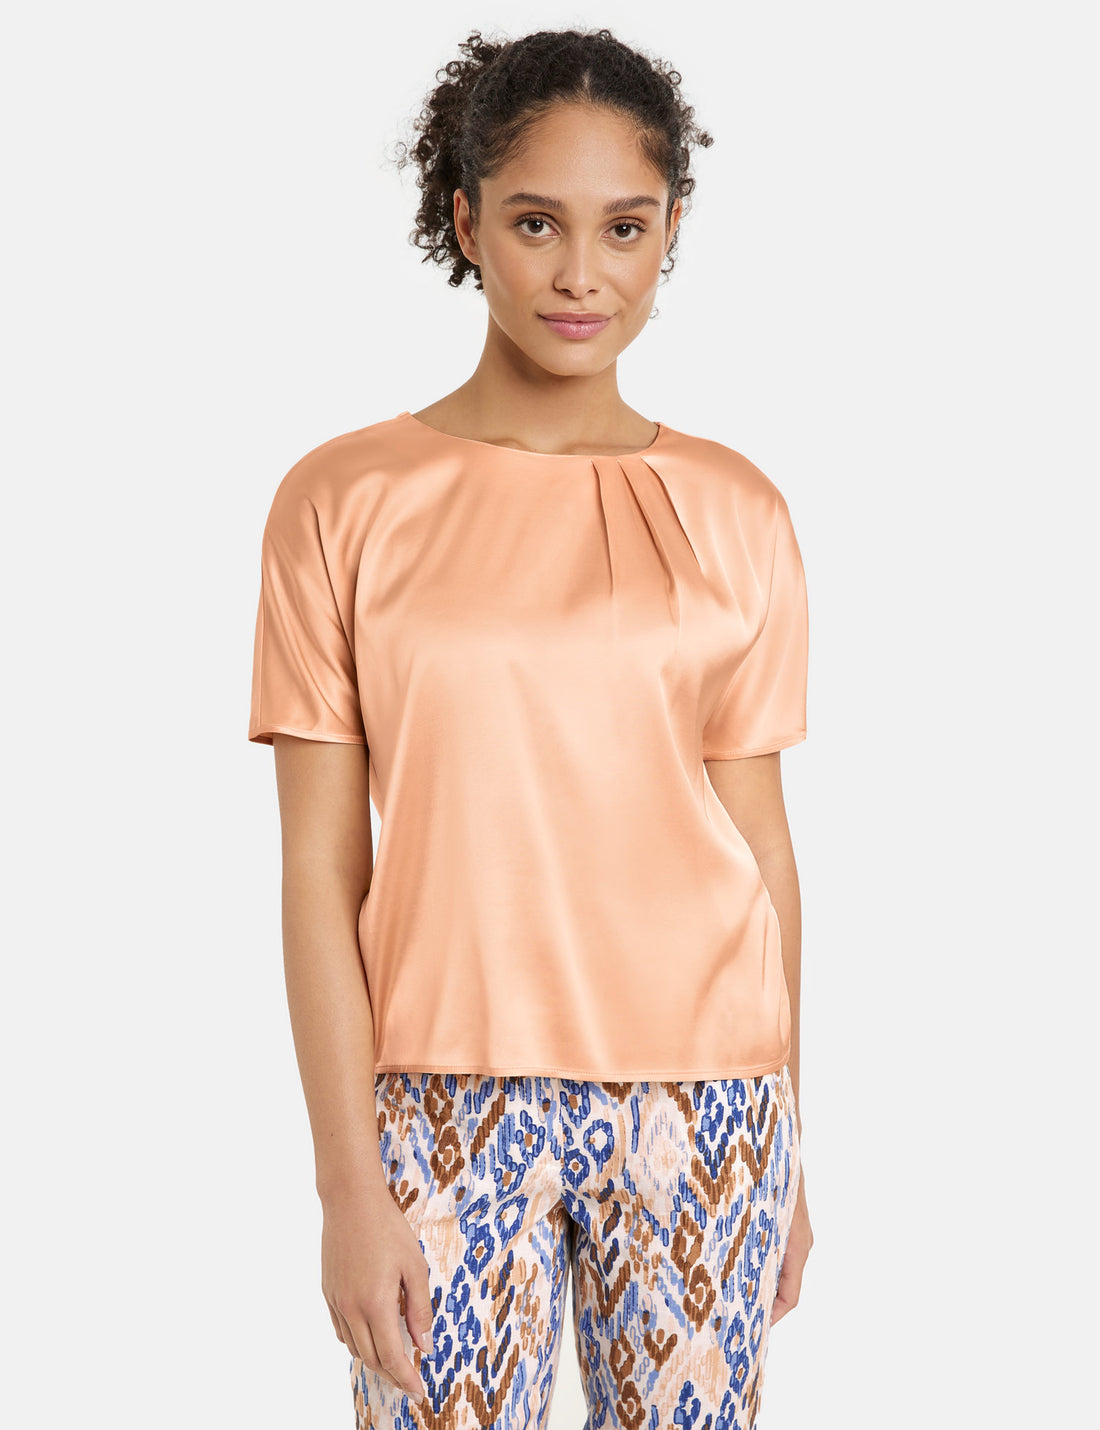 Flowing Blouse Top With Fabric Panelling_977047-35033_60315_01